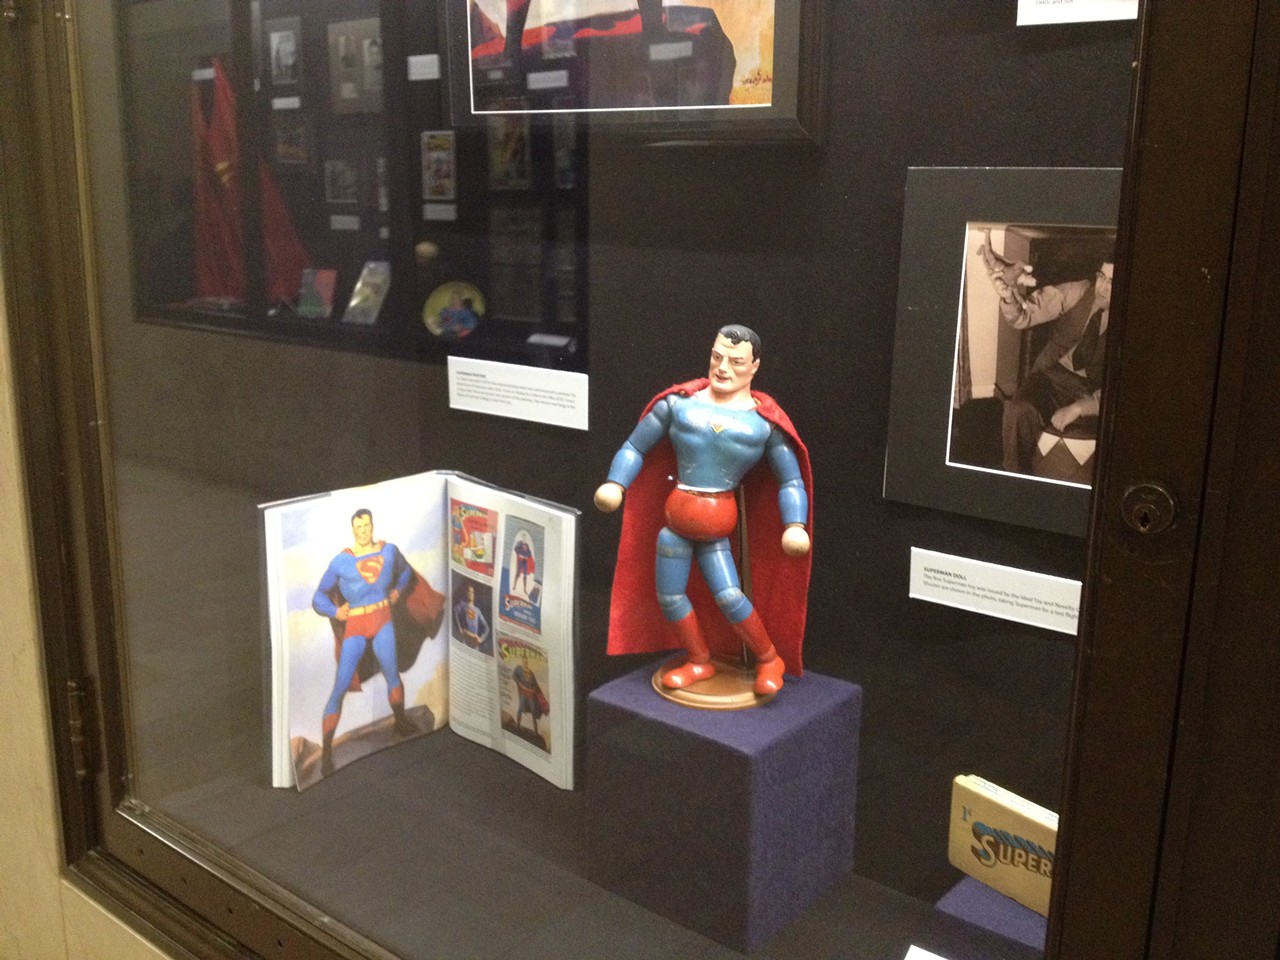 21 Cool Things You Can See at the Cleveland Public Library's Superman Exhibit